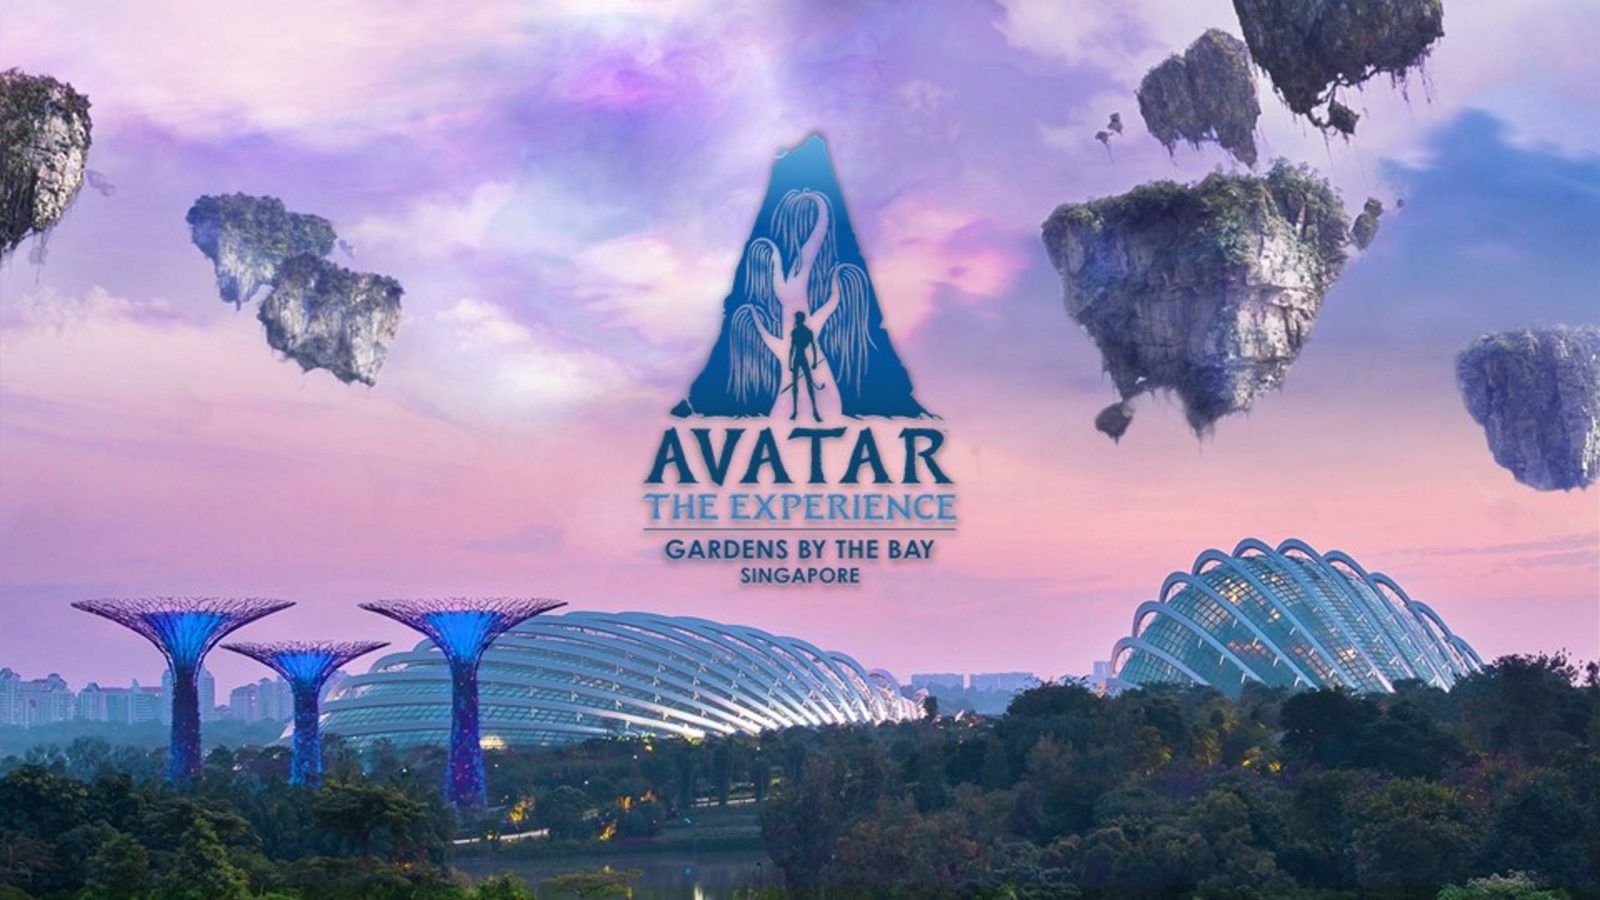 Avatarthemed walkthrough event debuting at Gardens by the Bays Cloud  Forest in 2022  MothershipSG  News from Singapore Asia and around the  world